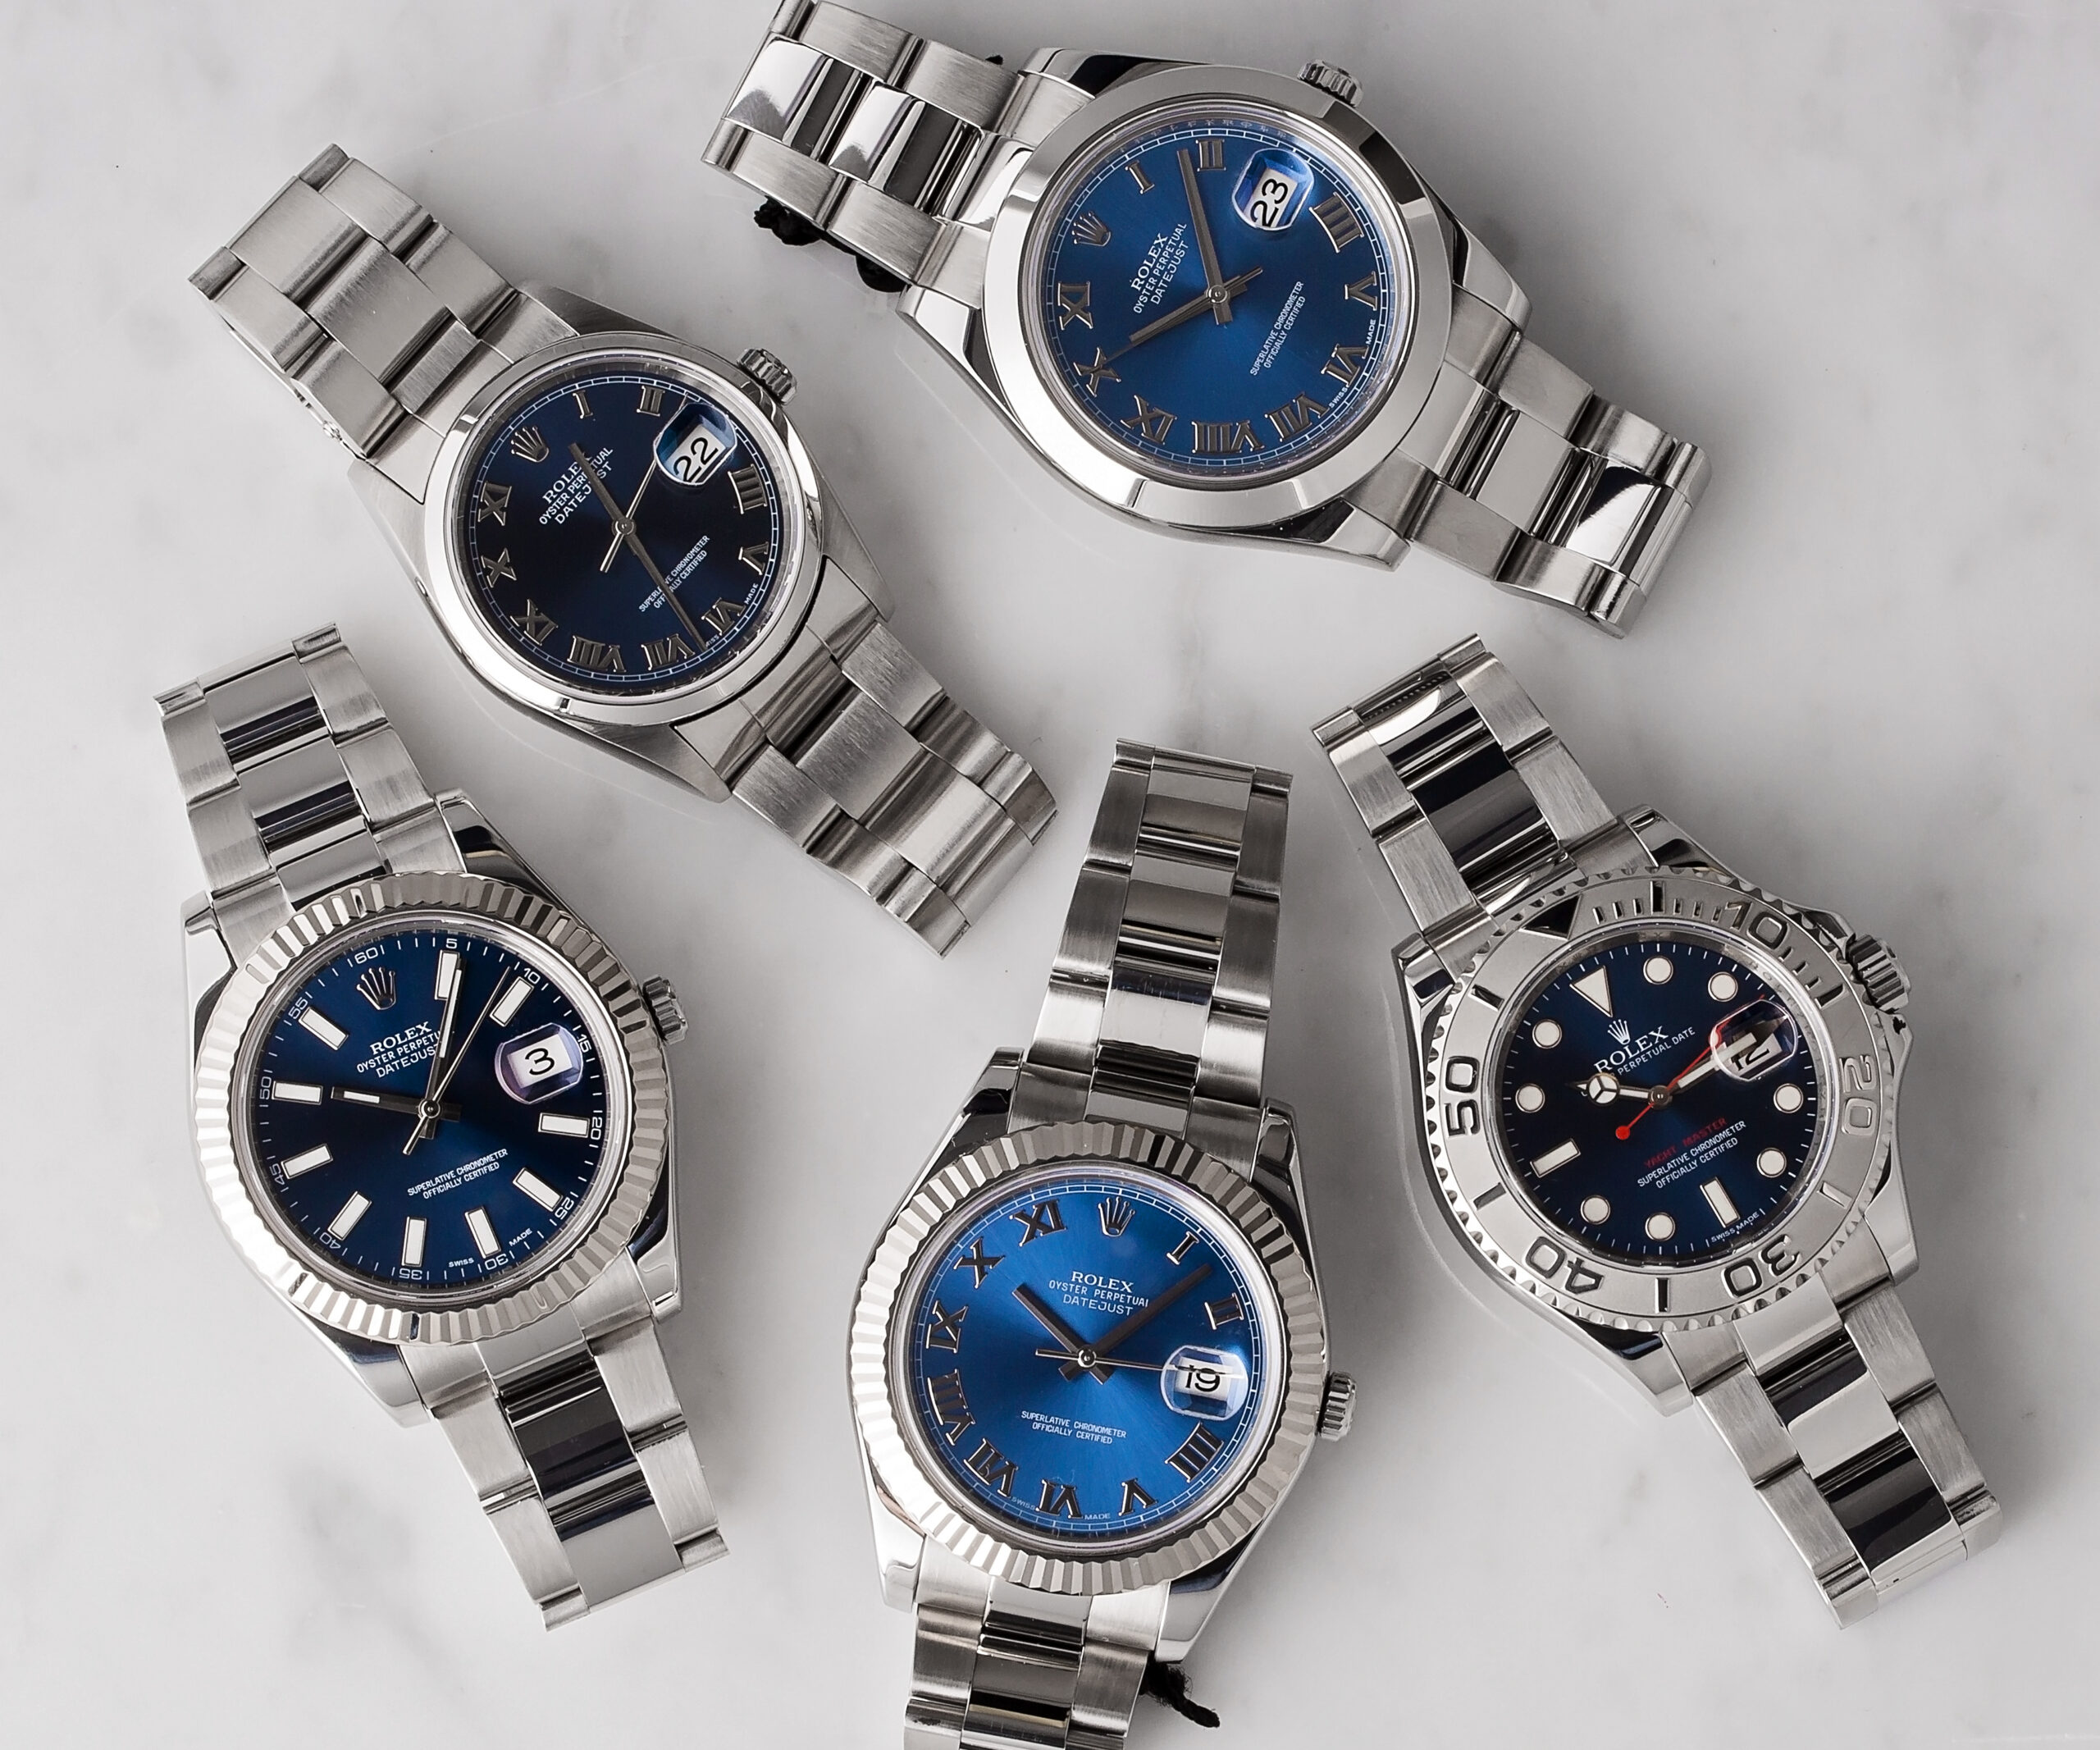 Which Rolex Watches To Buy Now?